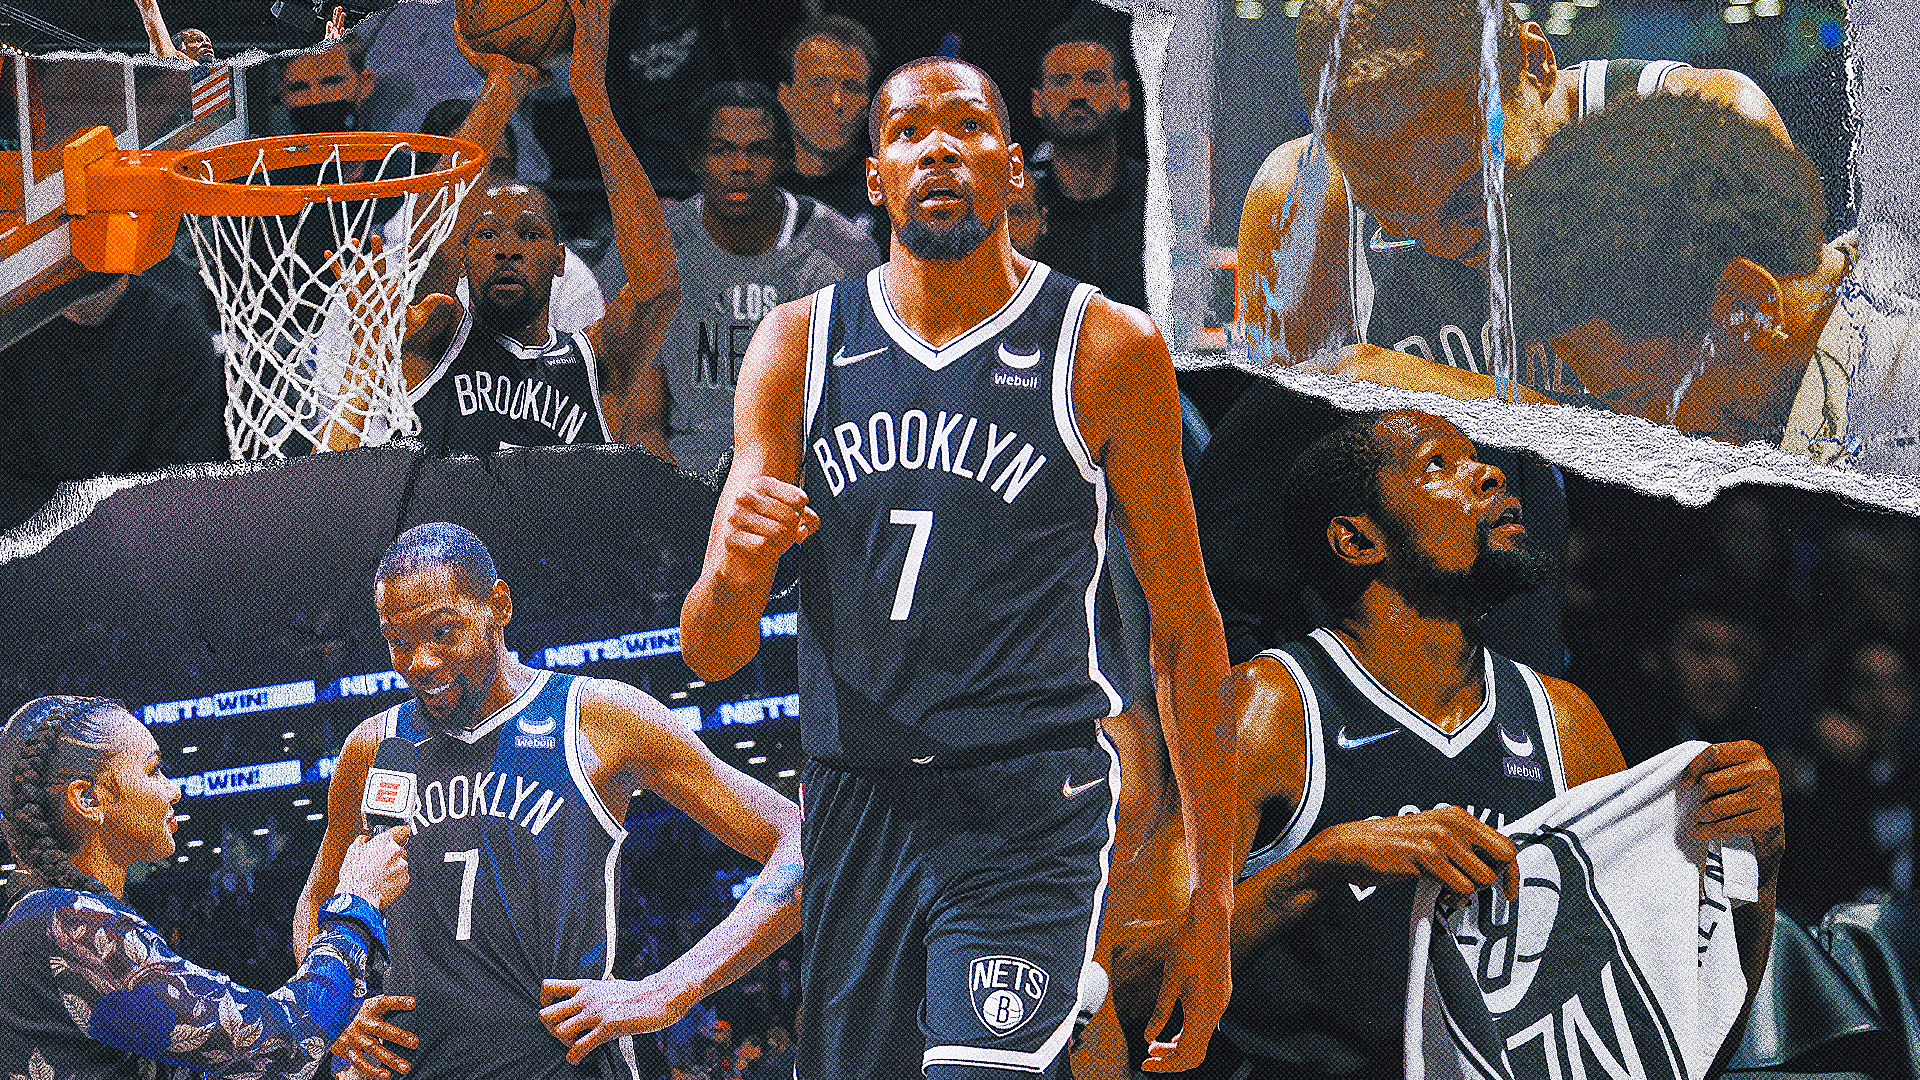 Kevin Durant shines with 53-point game in Nets' victory over Knicks